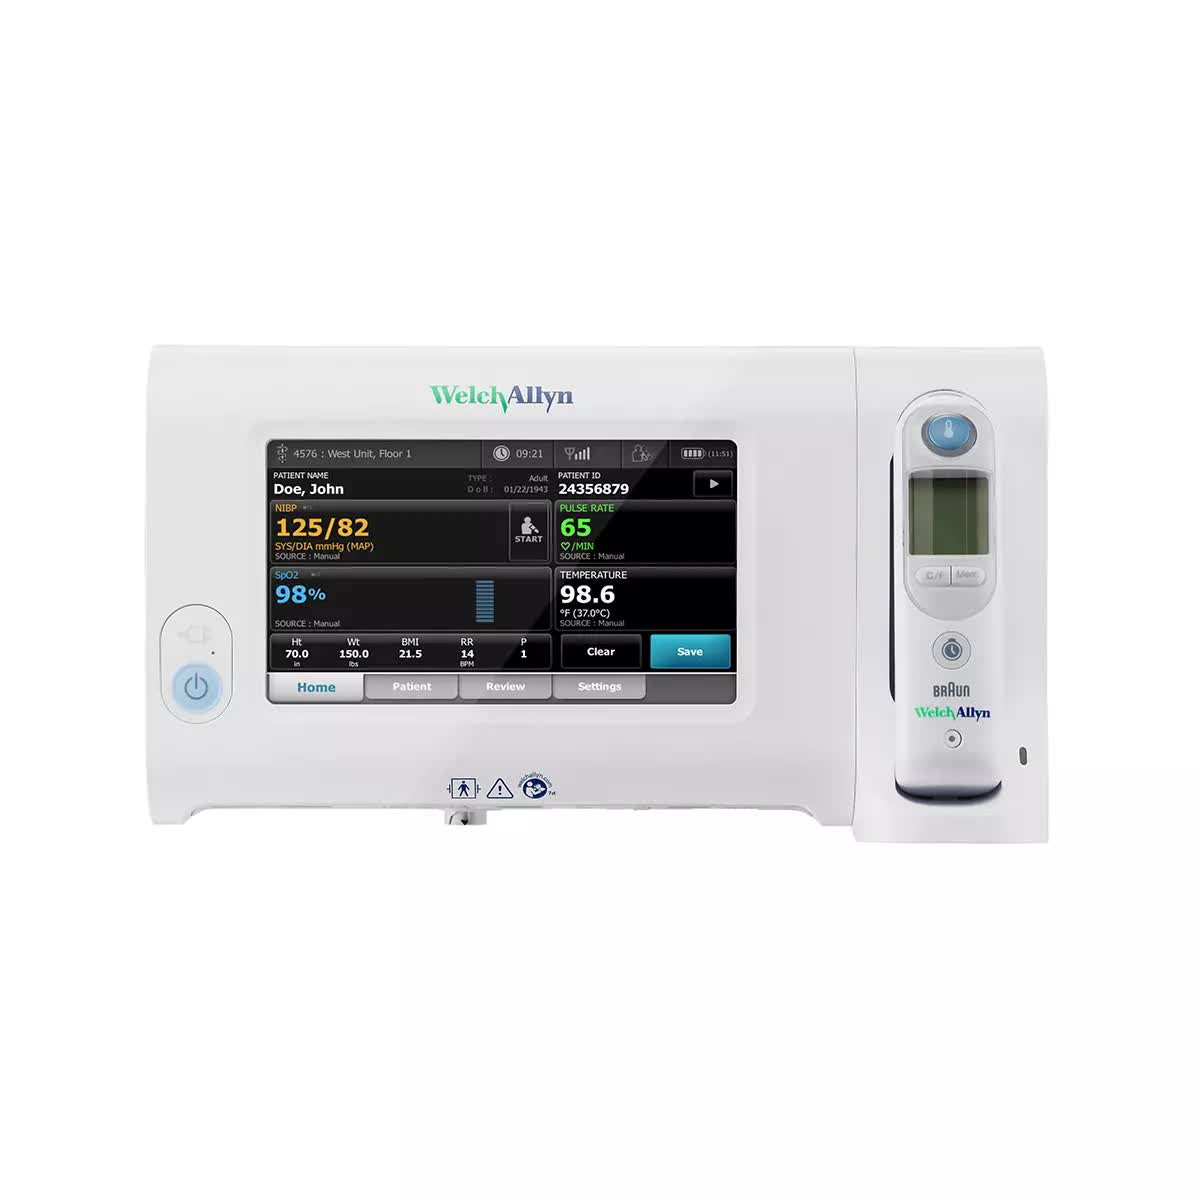 Welch Allyn Connex 7400 Upgradable to WIFI Connectivity Spot Monitor with Nellcor SpO2 and SureTemp Plus